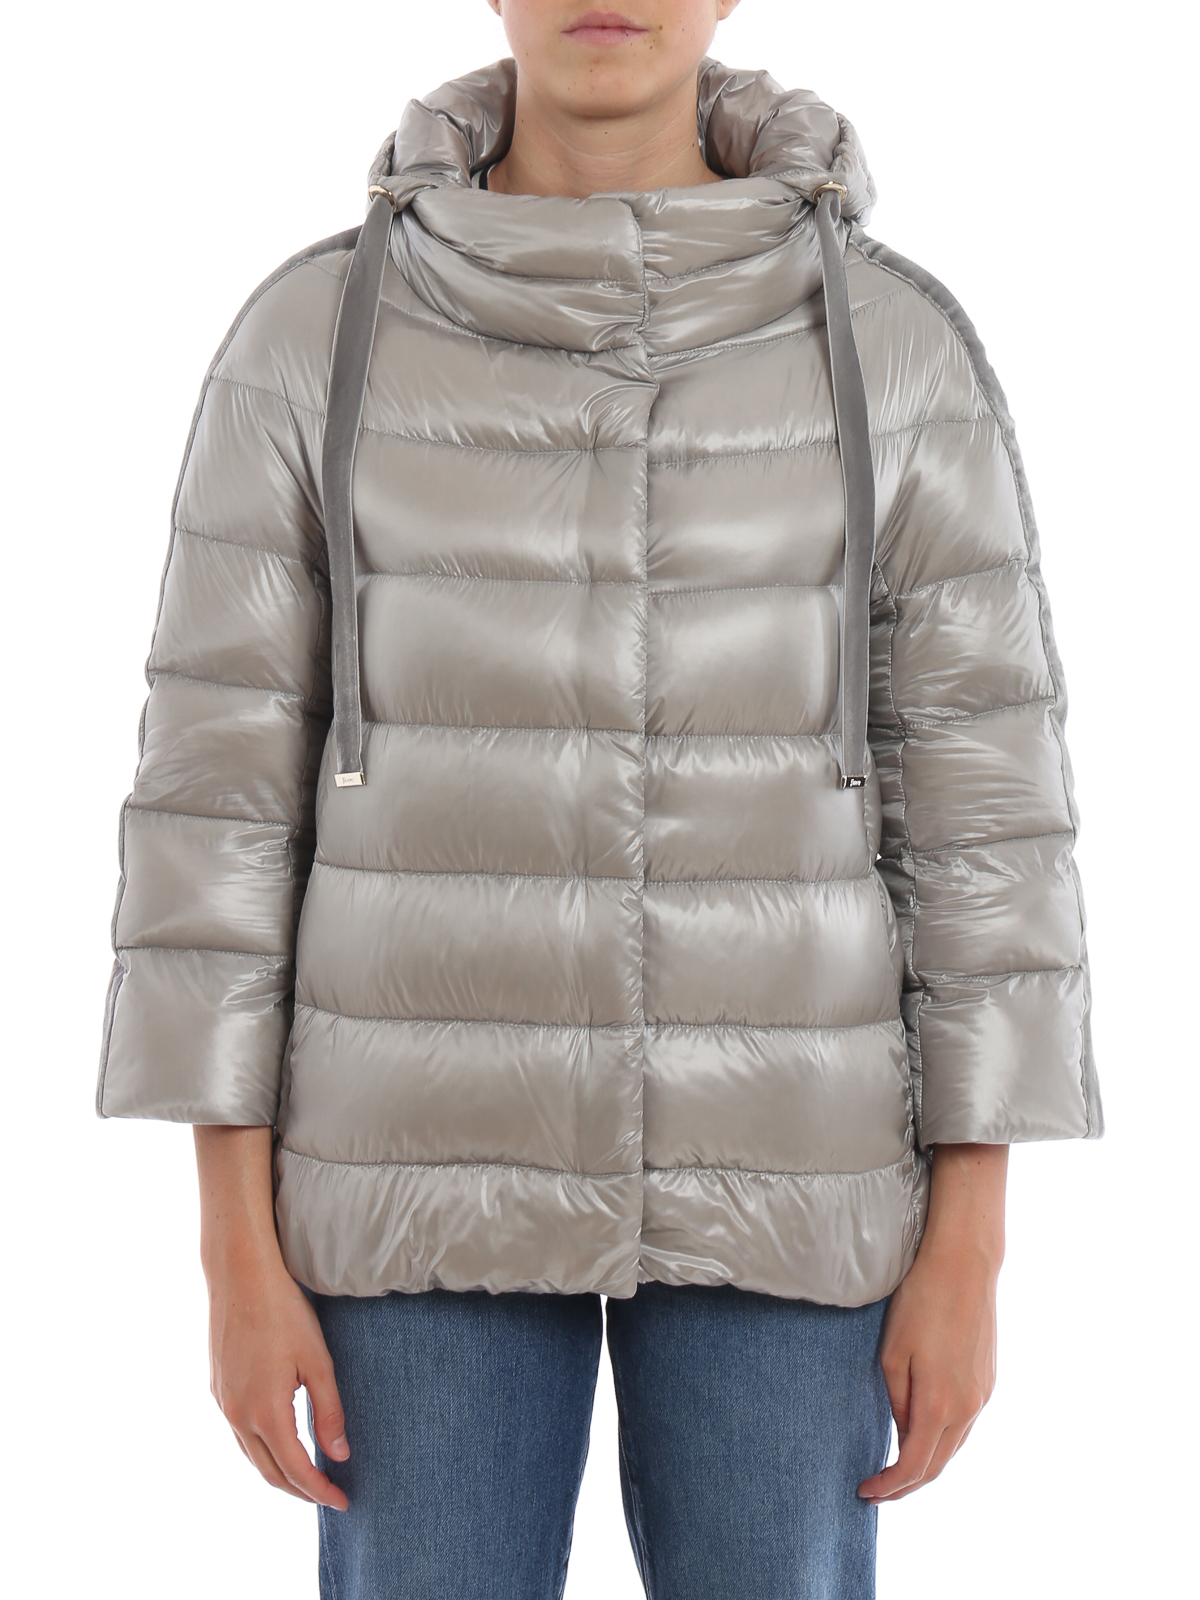 Herno - Light grey puffer jacket with 